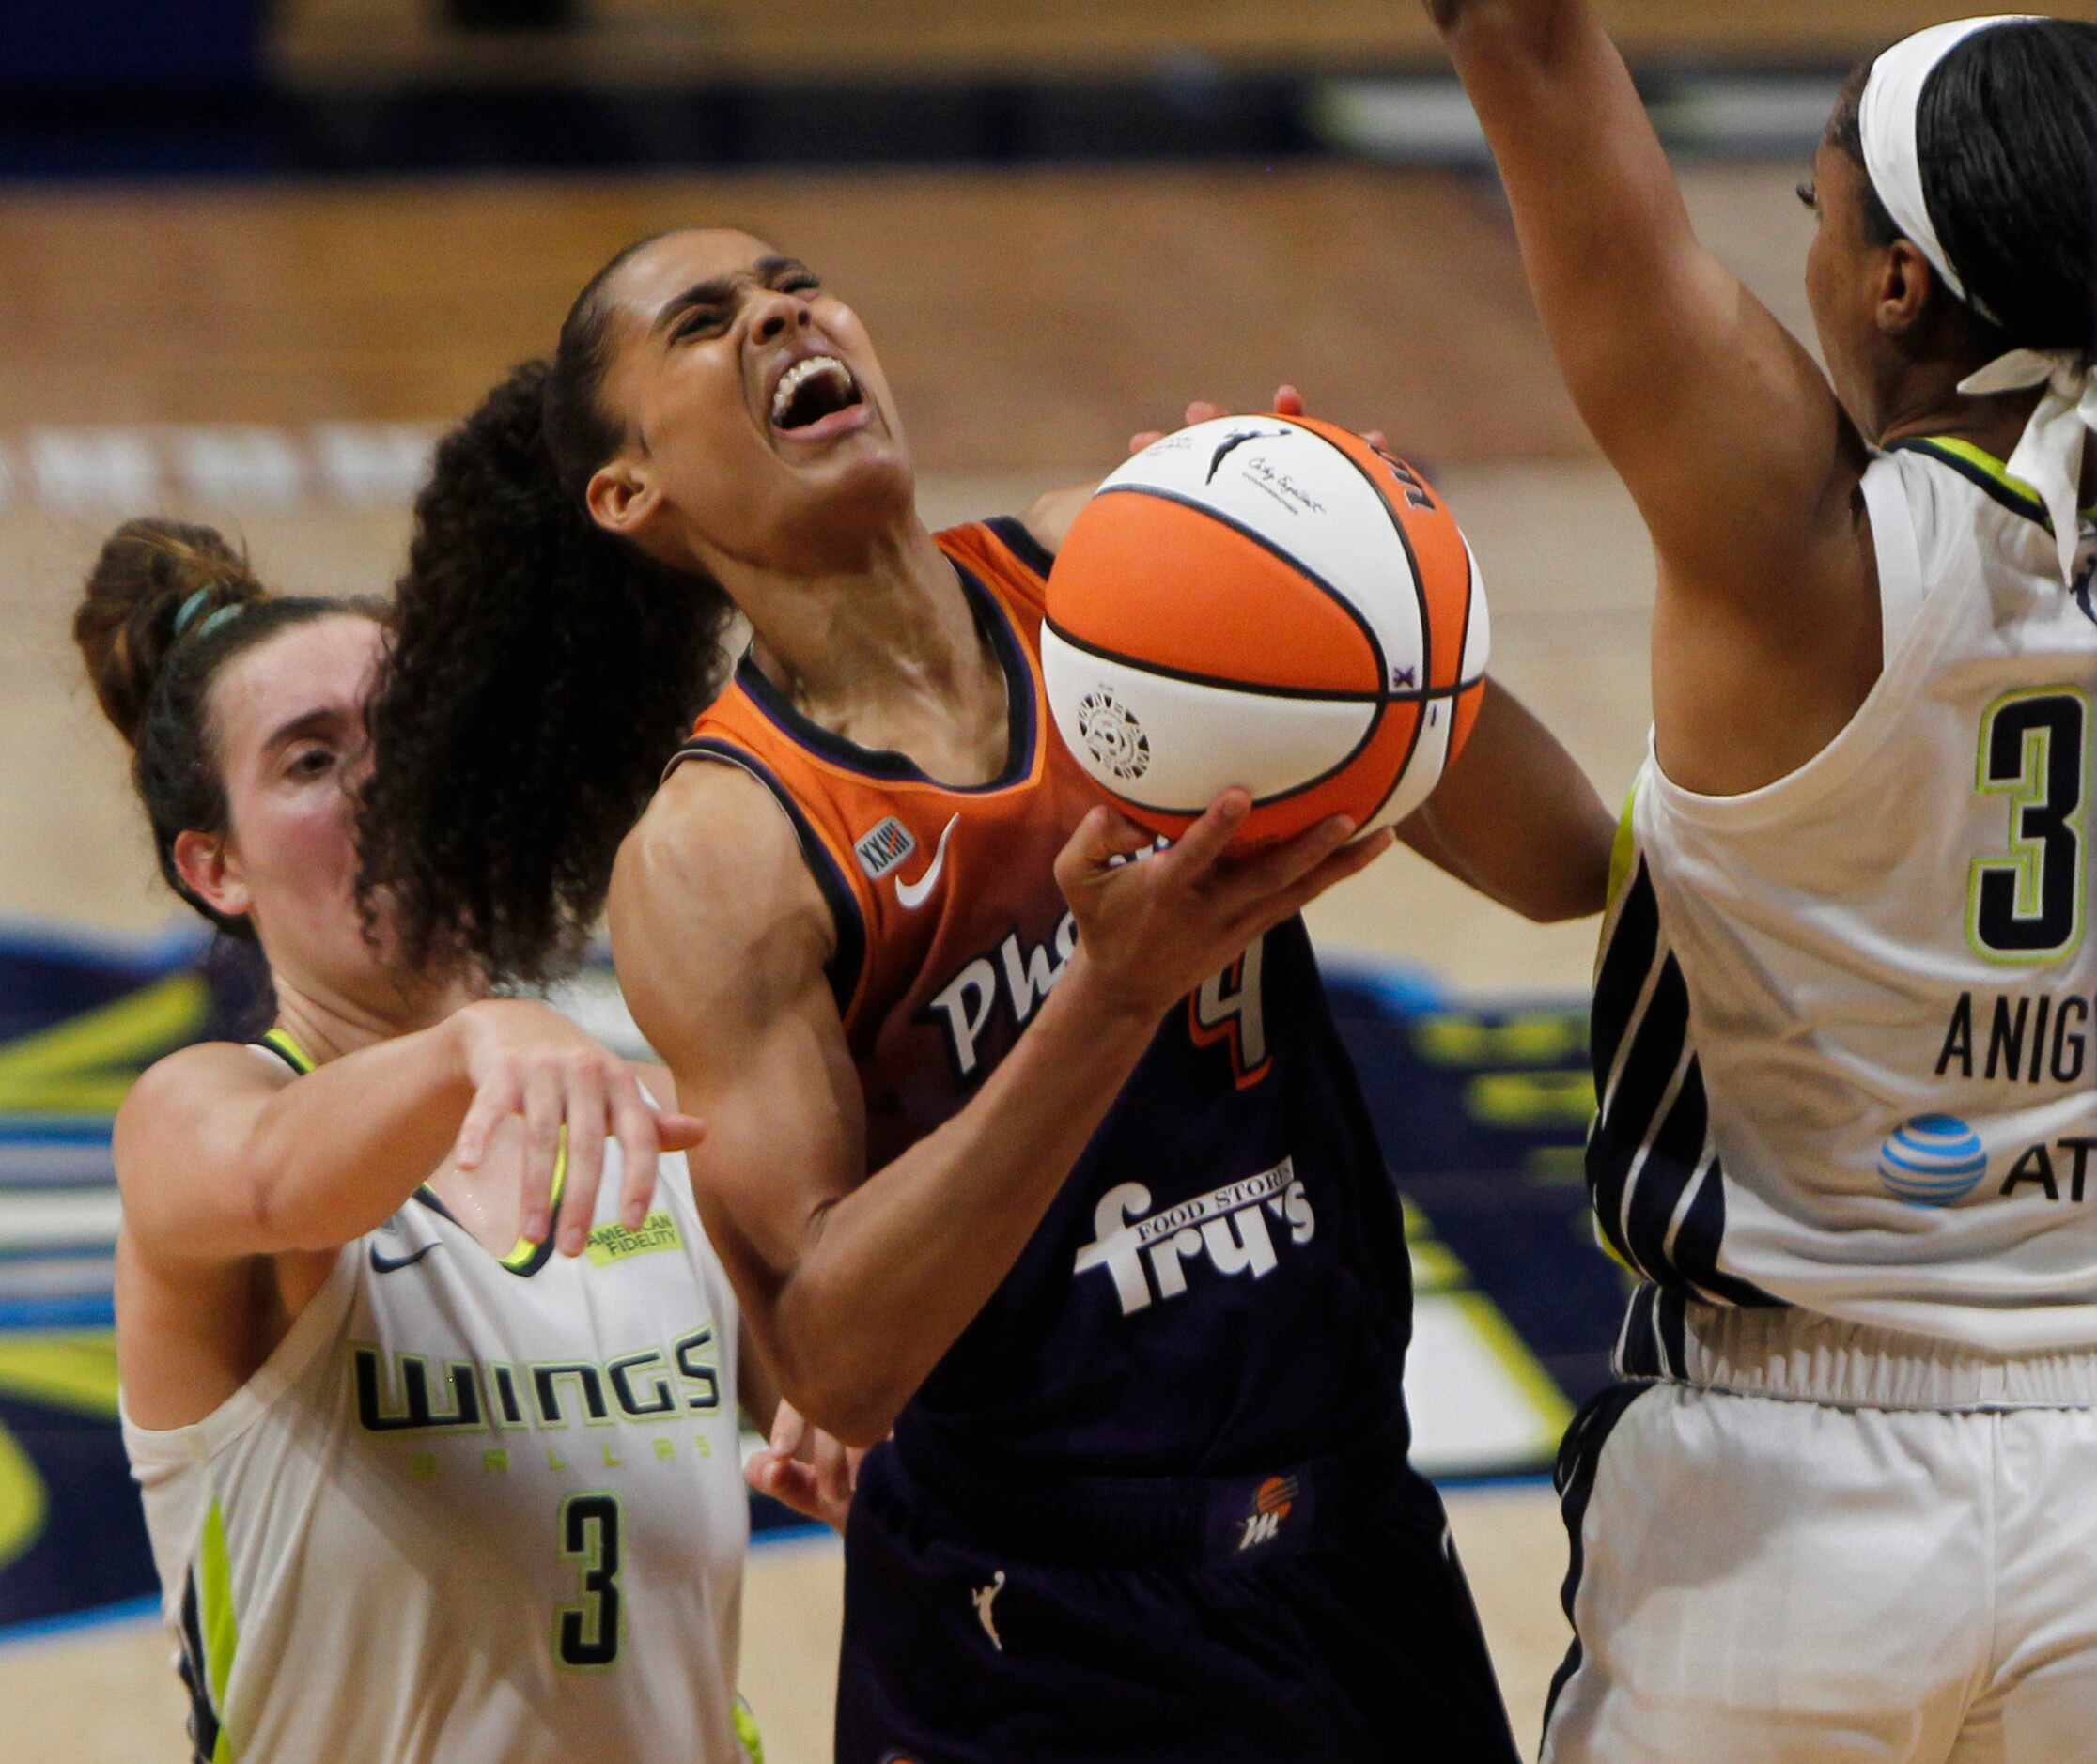 Phoenix guard Skylar Diggins-Smith (4) winces as she drives amidst tight defensive coverage...